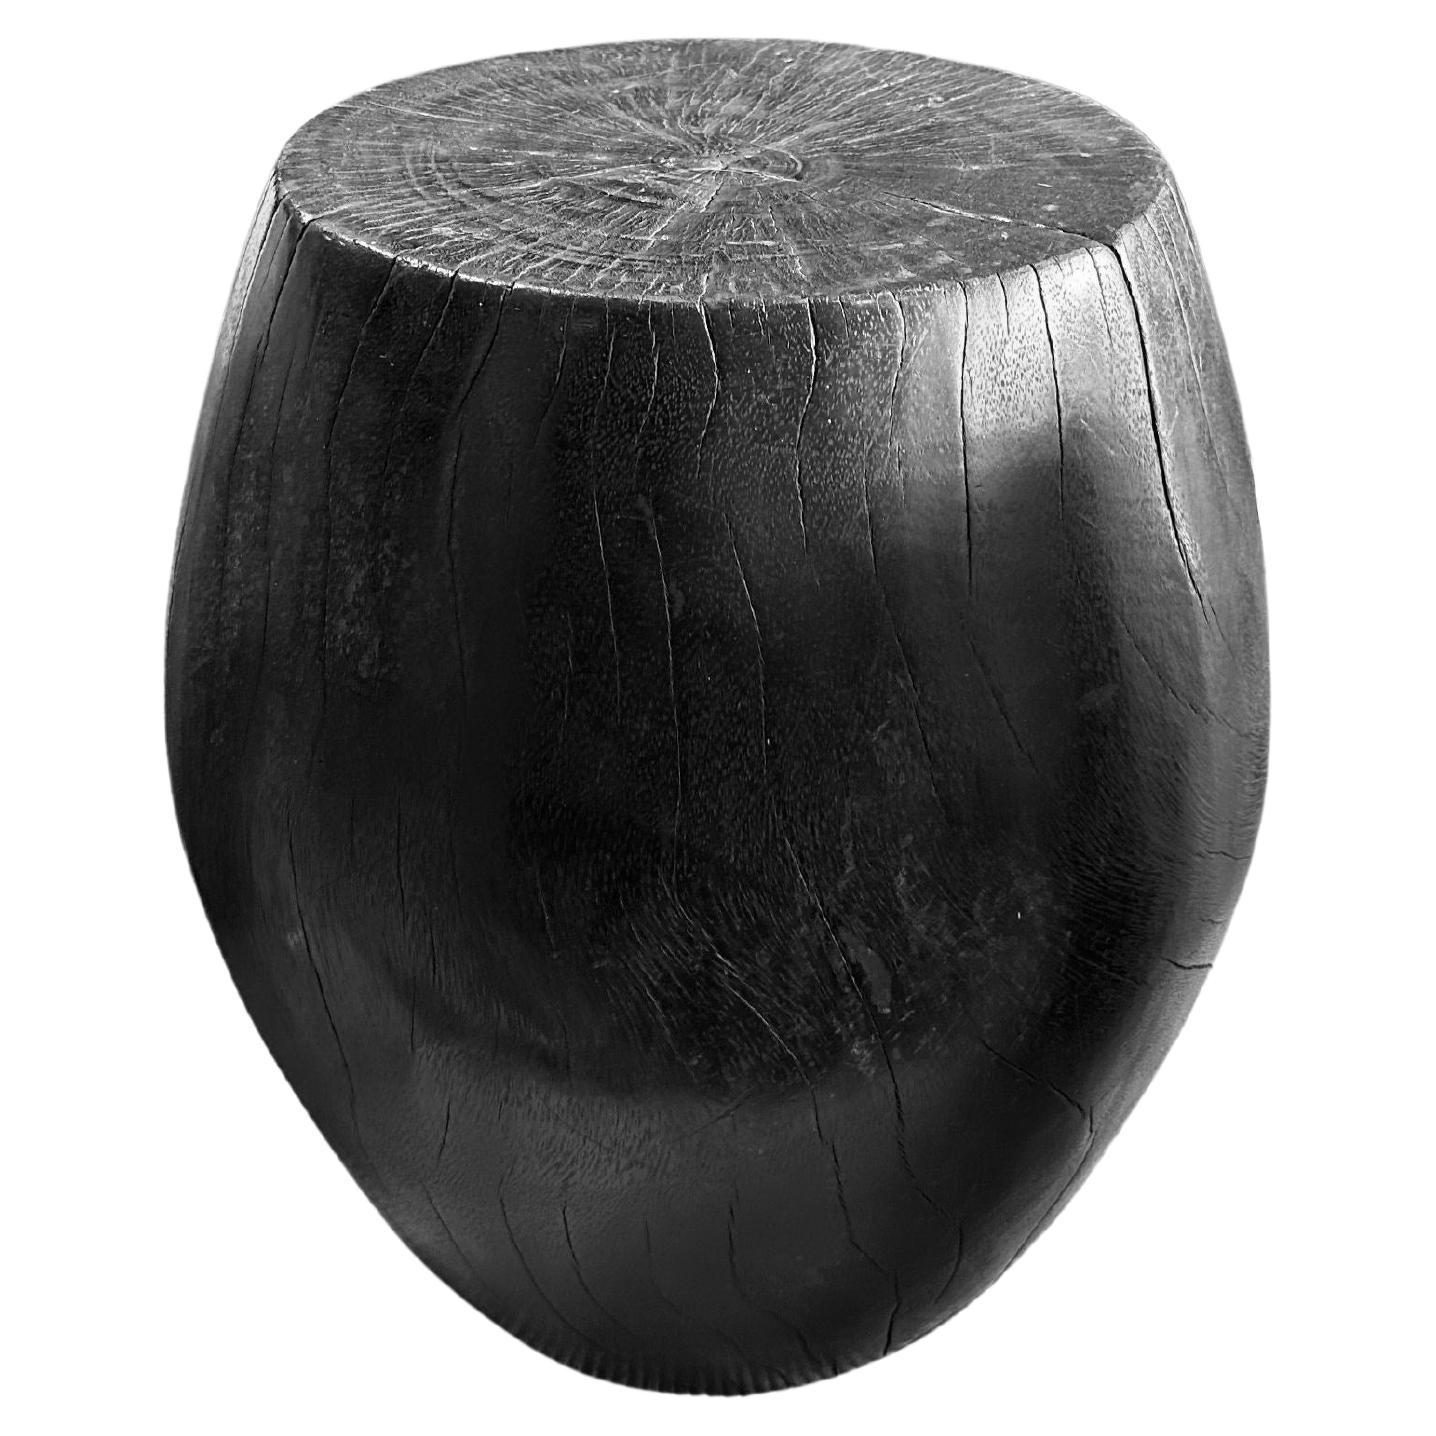 Round Mango Wood Side Table, Burnt Finish, Carved Detailing, Modern Organic For Sale